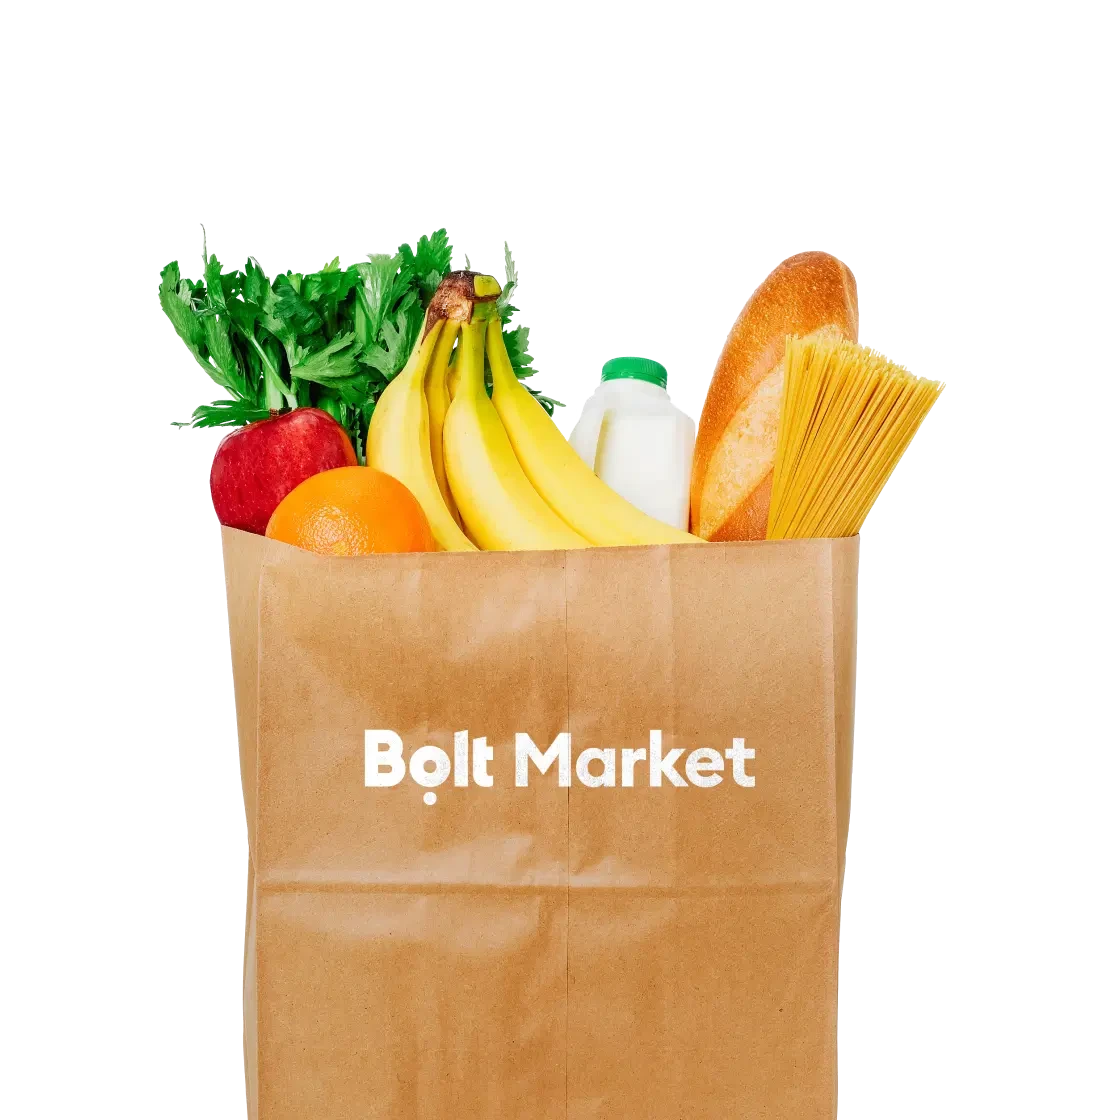 Want to sell your products with Bolt Market?